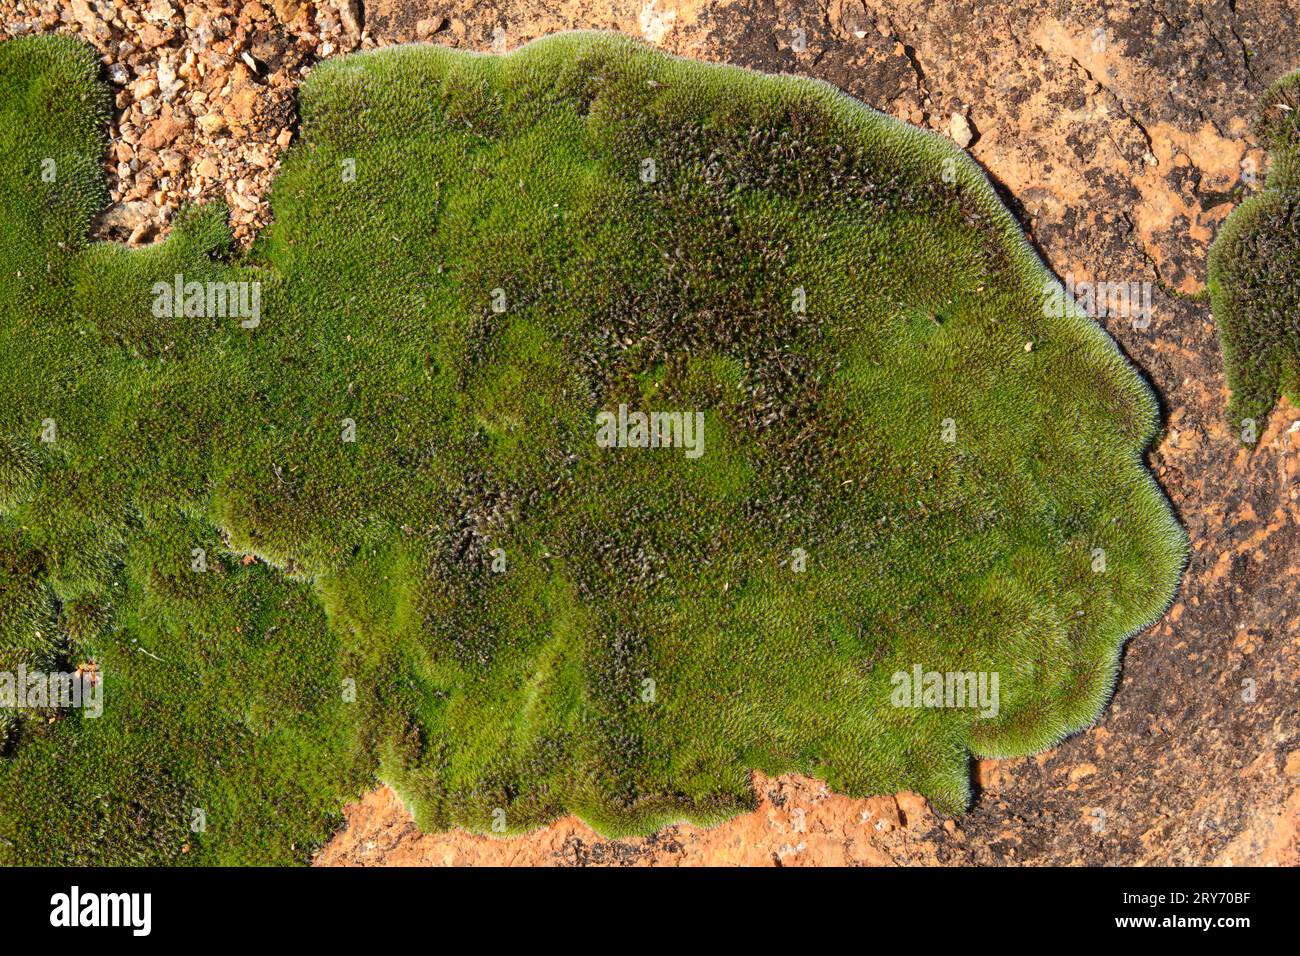 Image of detail of moss growing on the granite surface of Beringbooding Rock in the Wheatbelt region of Western Australia. Stock Photo